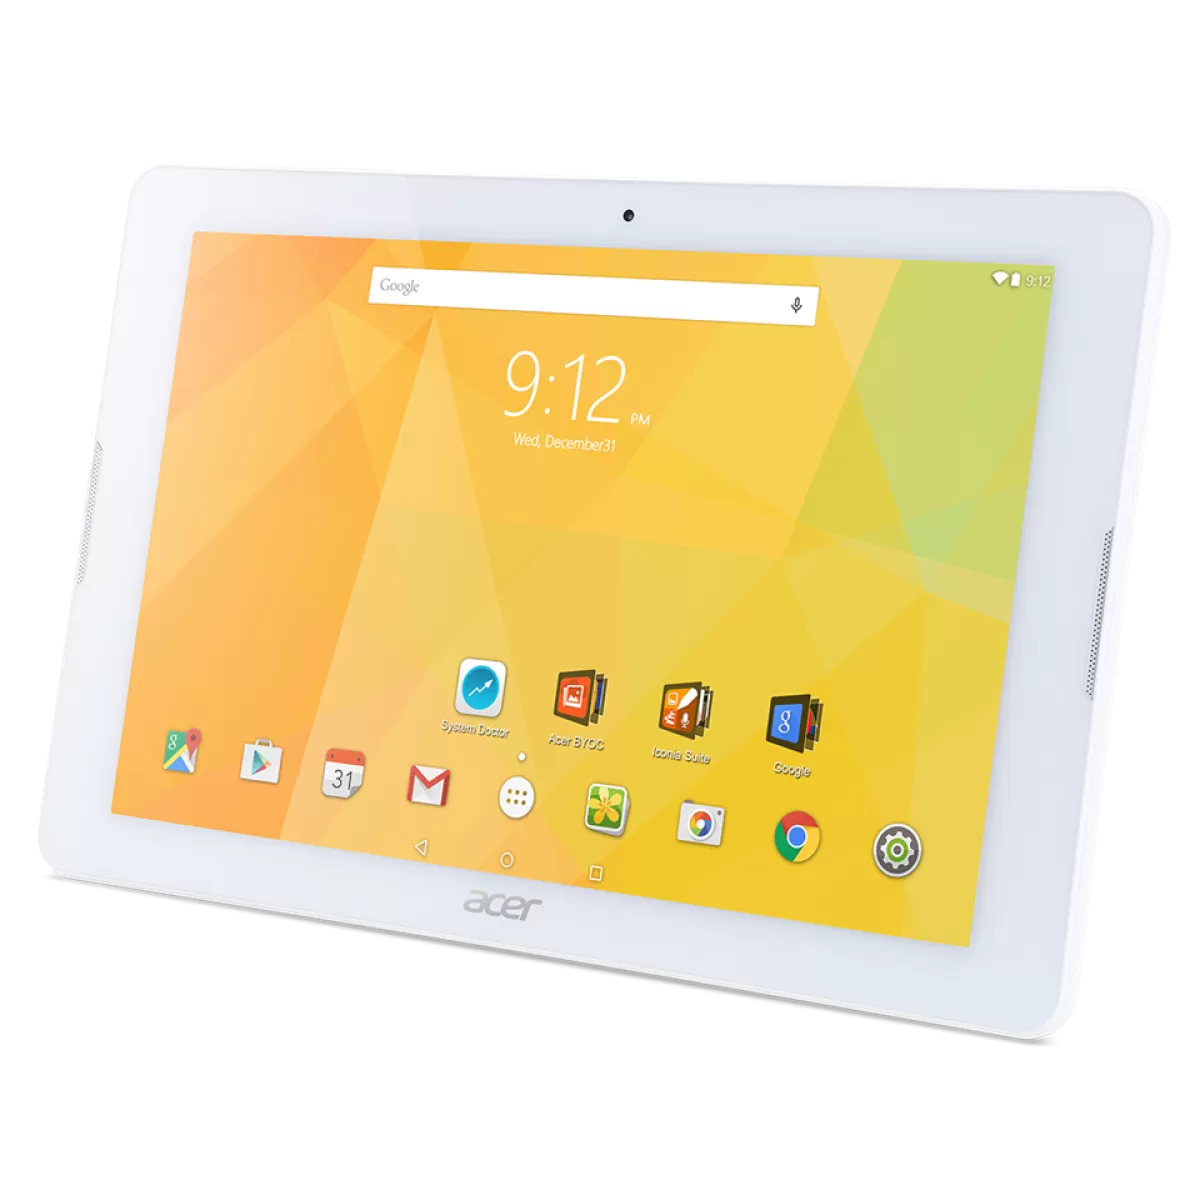 Таблет Tablet Acer Iconia B3A30K32D WiFi/10.1 IPS (HD 1280 x 800), MTK MT8163 Quadcore Cortex A53/1GB/16GB eMMC, Cam (2MP front, rear 5 MP 1080p FHD)/Gsensor, Micro USB, microSD, Android 6.0 (Marshmallow), White